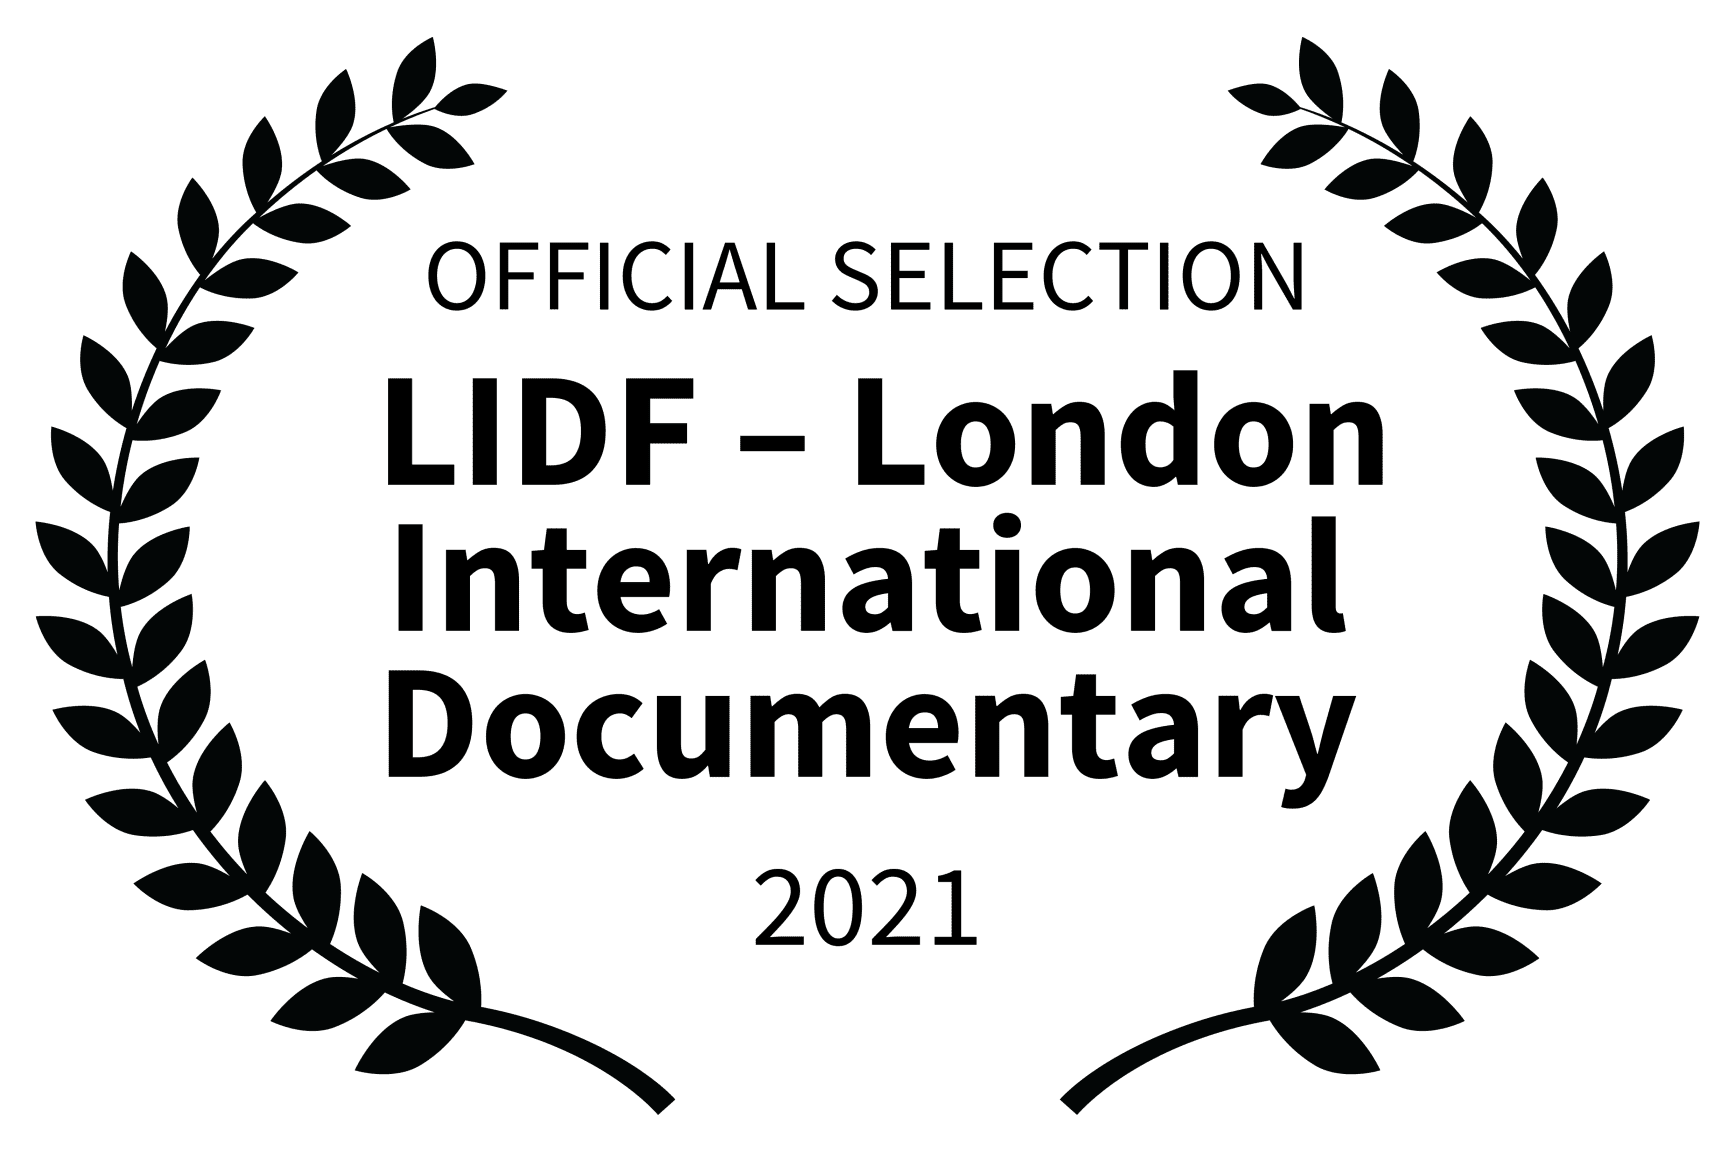 OFFICIAL SELECTION - LIDF London International Documentary - 2021 (1)